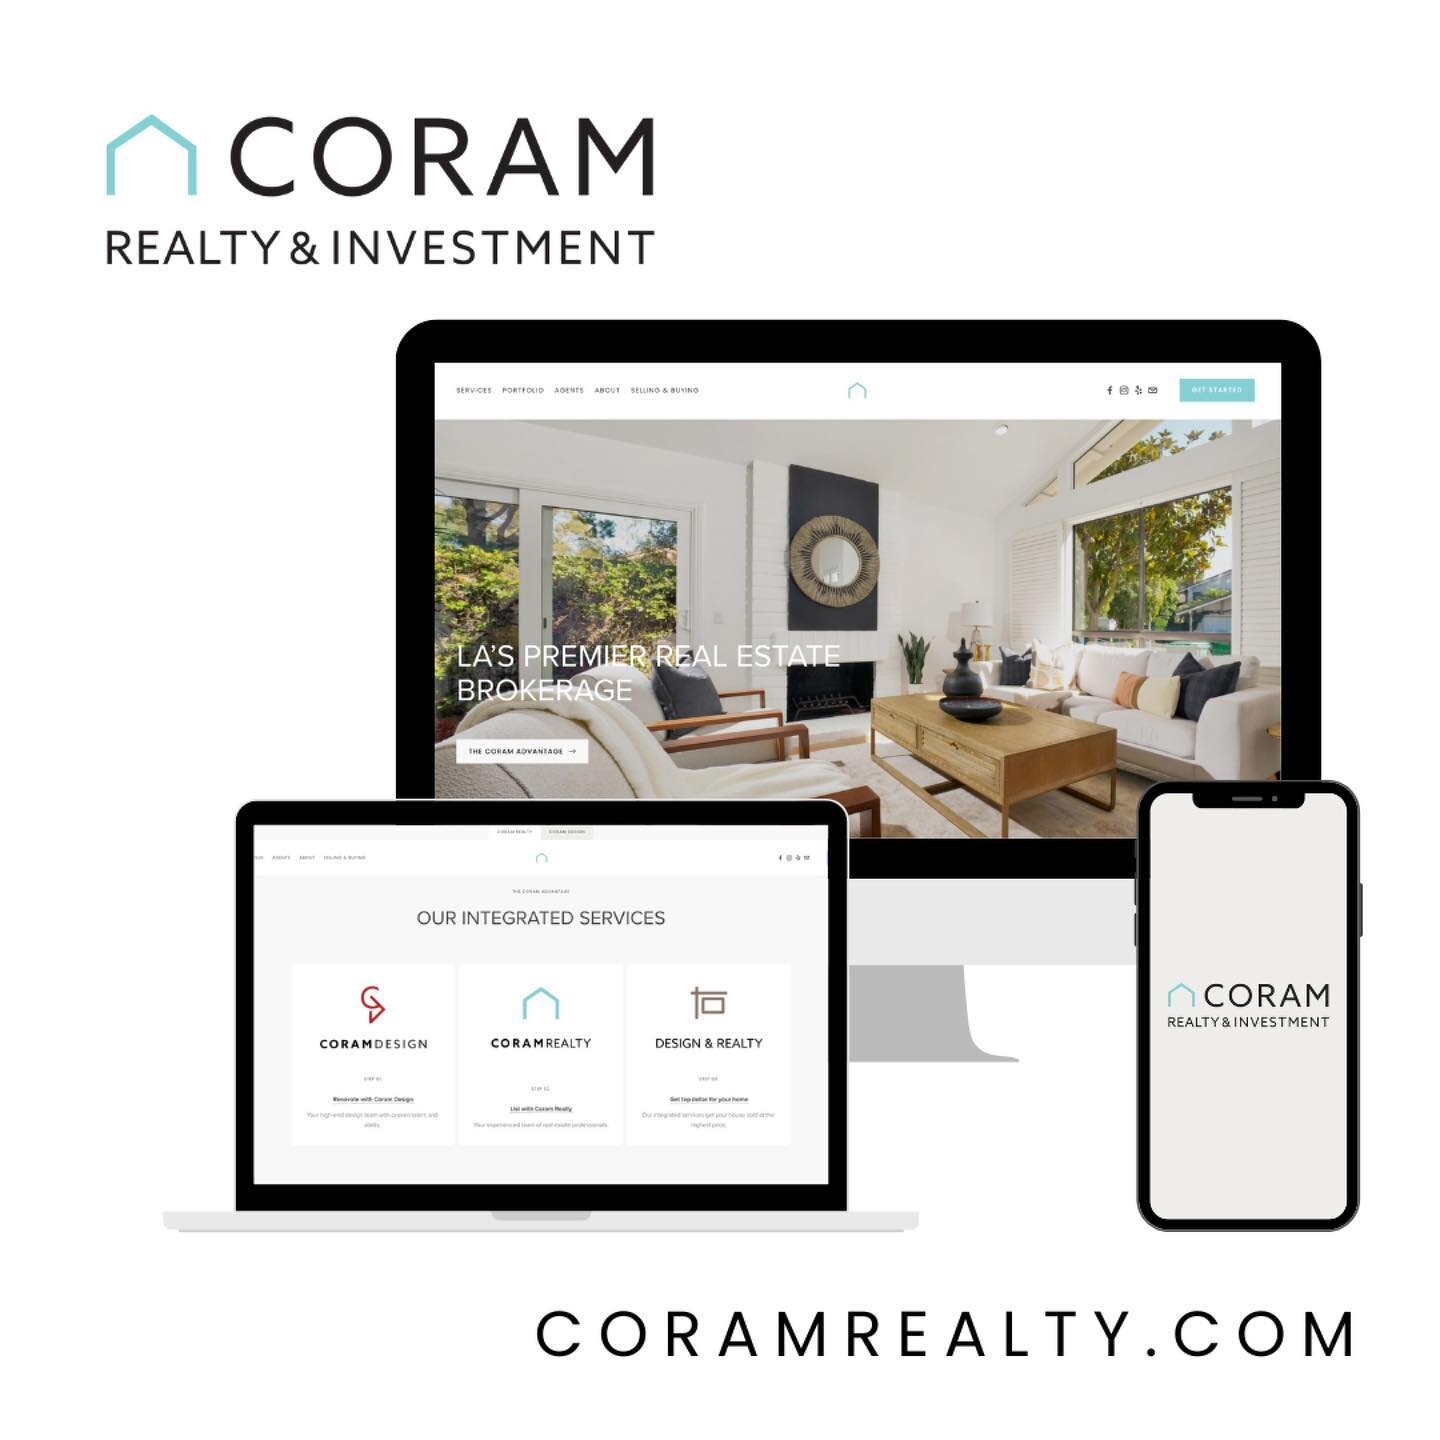 Our Realty &amp; Investment site got the transformation it&rsquo;s been needing to match the looks of our design center site. 

CORAMREALTY.COM - if you are on the market to sell, make sure to check out our services to see how you can get top dollar 